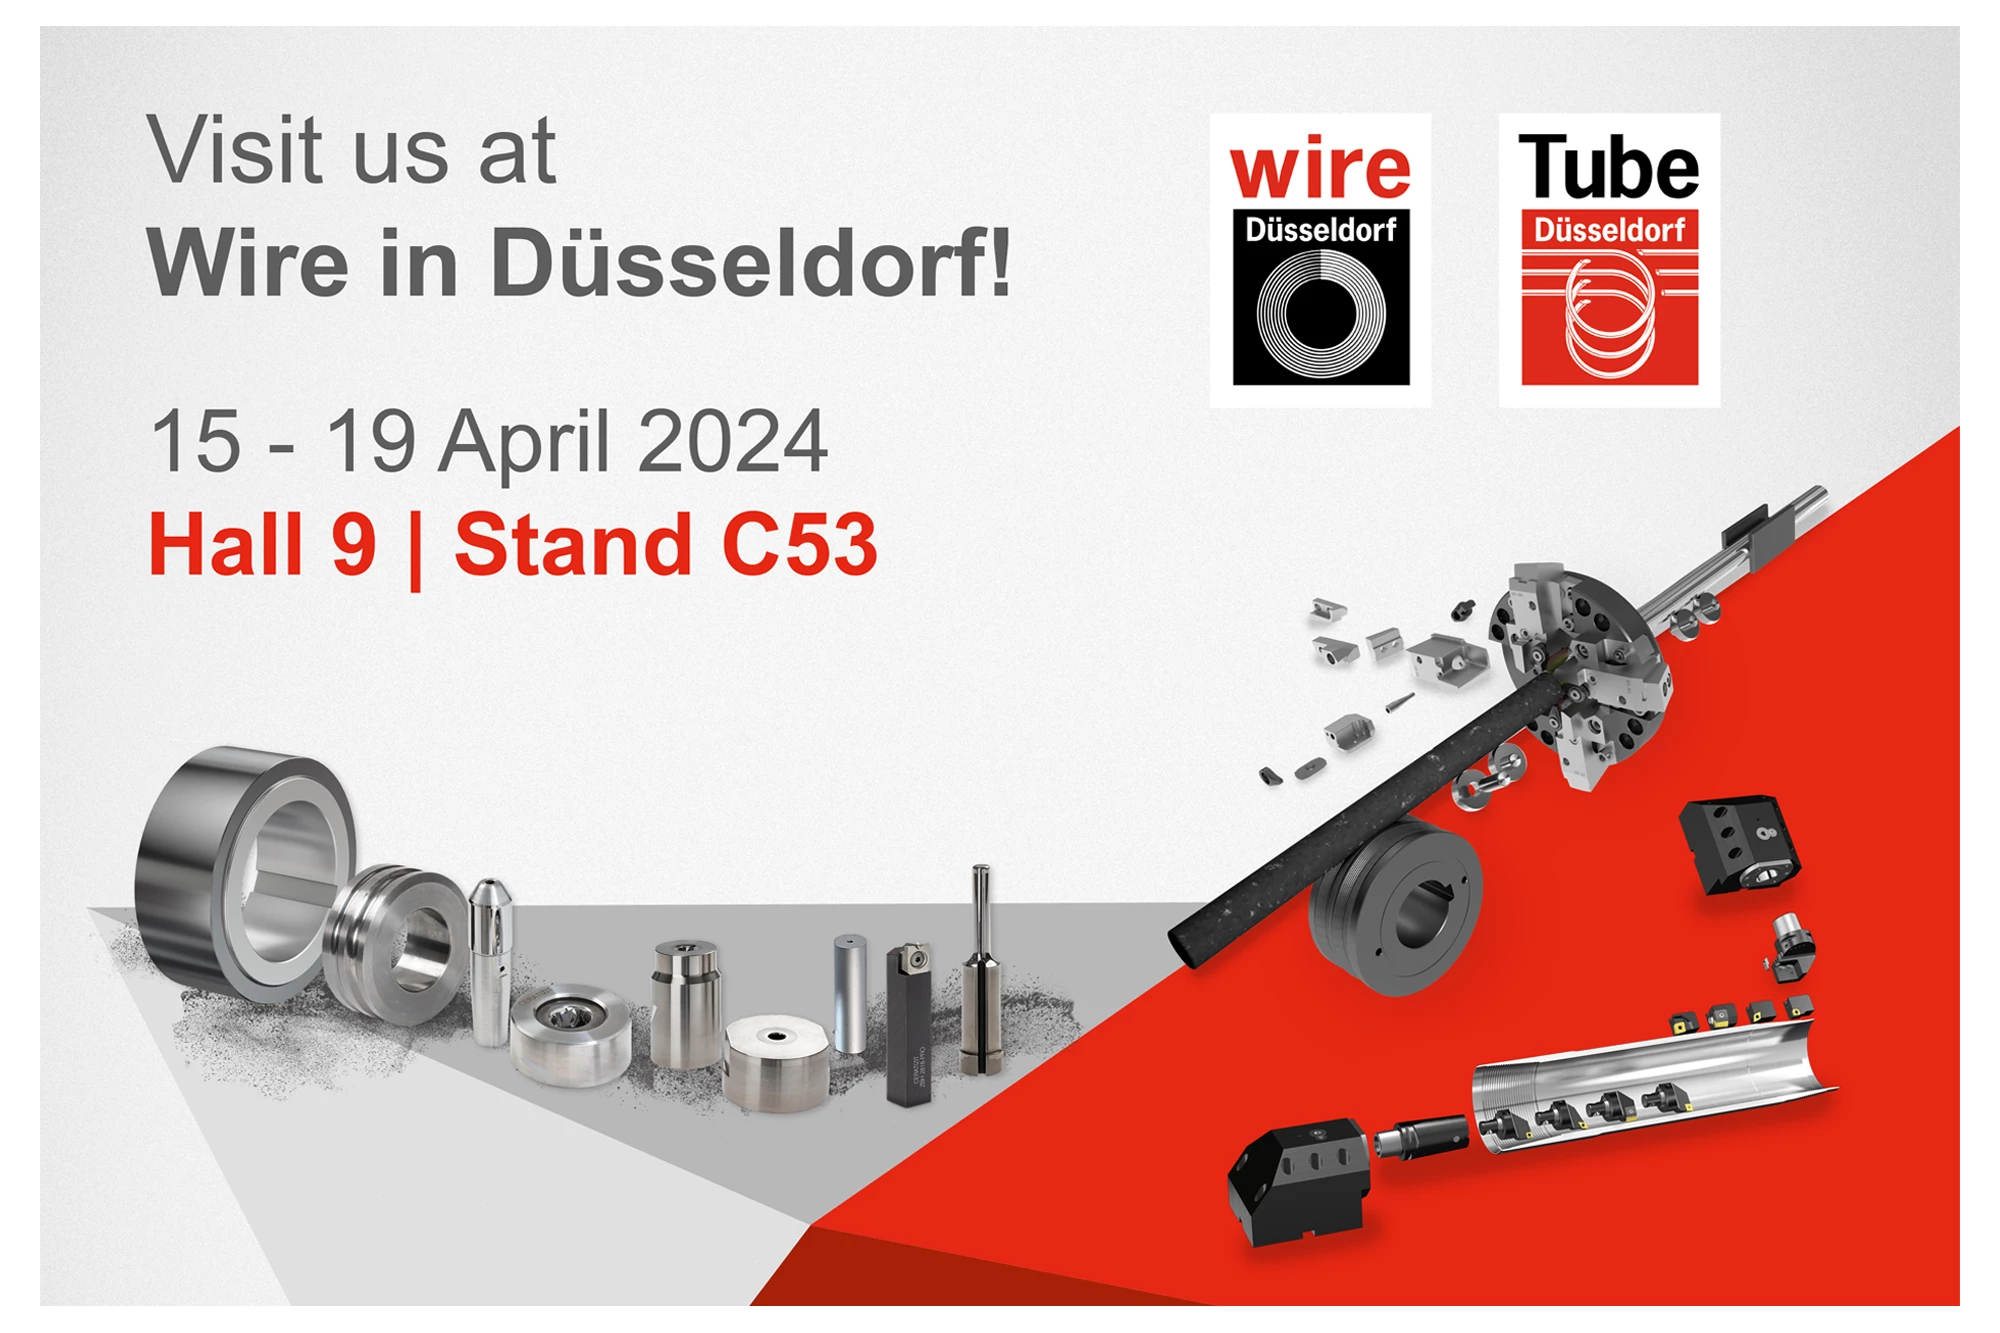 Join CERATIZIT at Wire and Tube 2022 in Düsseldorf